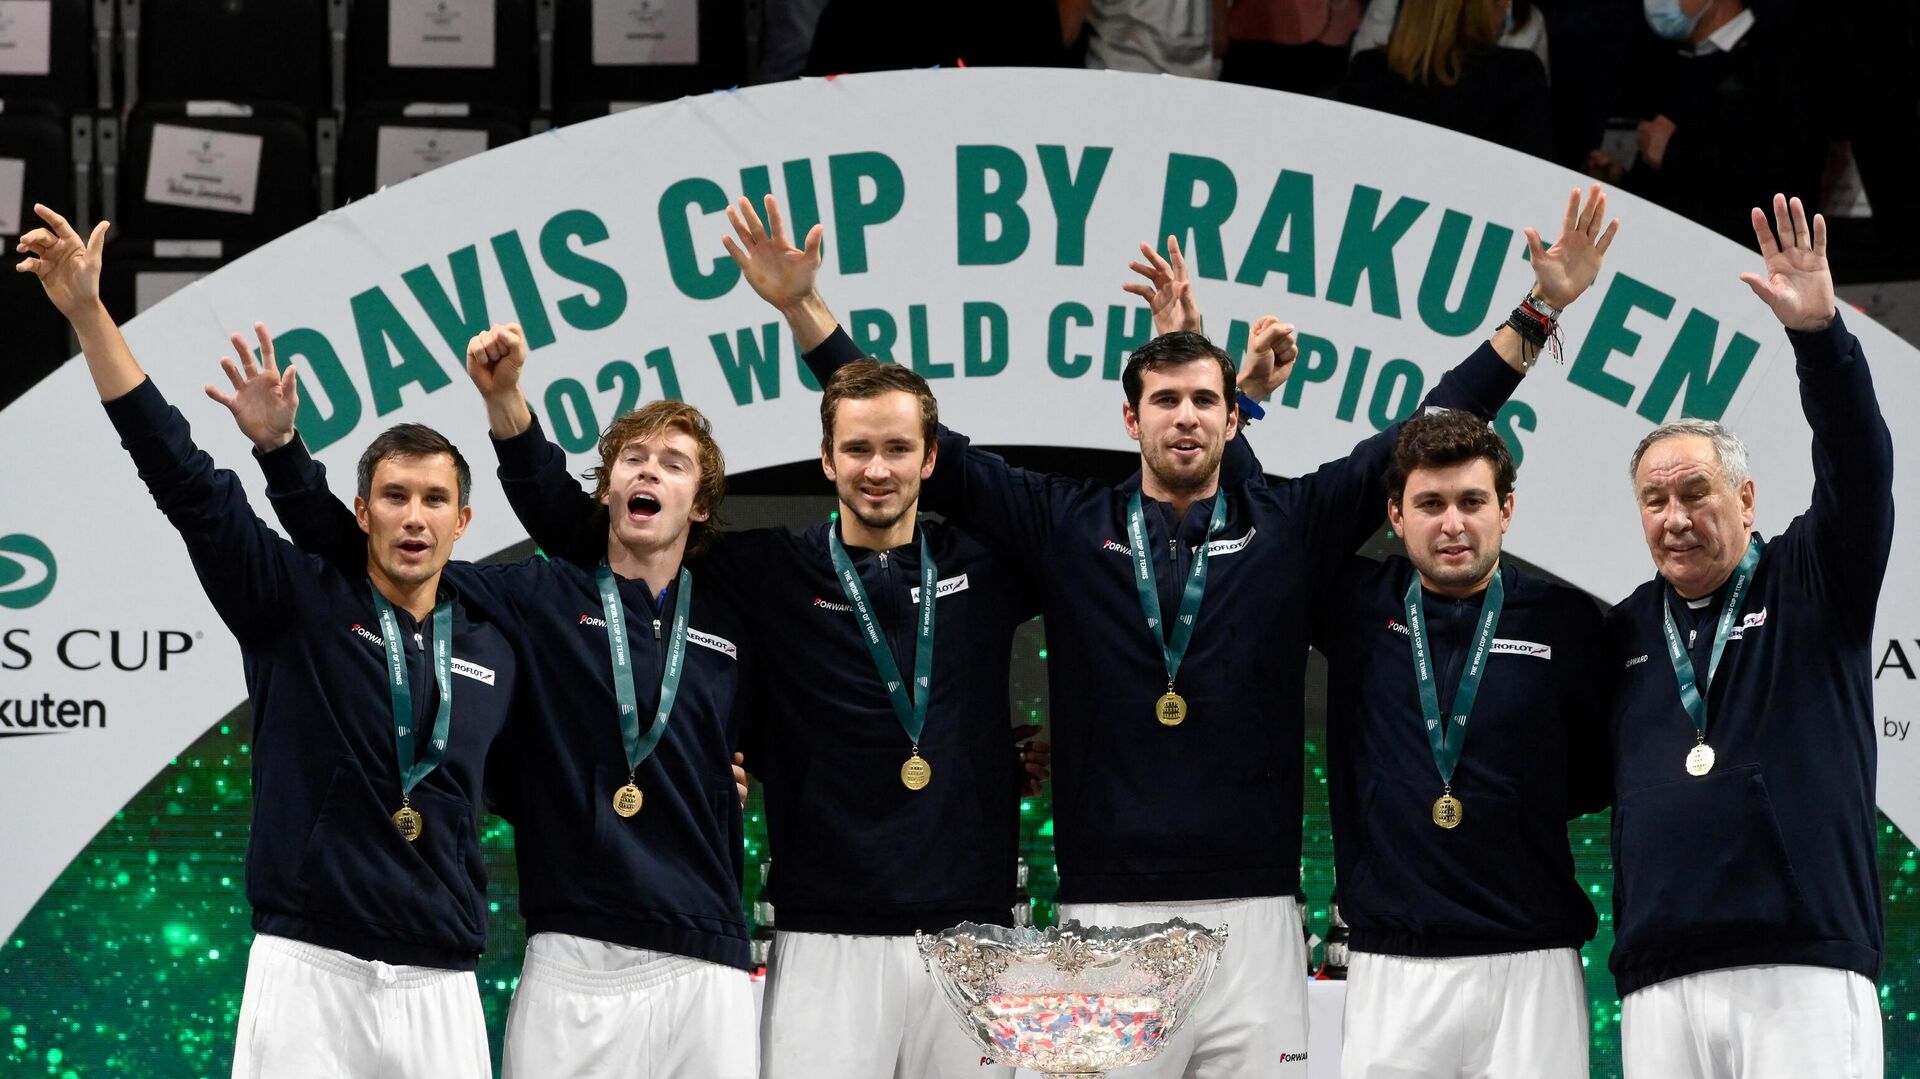 (From L) Russia's Evgeny Donskoy, Russia's Andrey Rublev, Russia's Daniil Medvedev, Russia's Karen Khachanov, Russia's Aslan Karatsev and Russia's Davis Cup captain Shamil Tarpischev pose for pictures with the trophy after winning the Davis Cup tennis tournament at the Madrid arena in Madrid on December 5, 2021. (Photo by OSCAR DEL POZO / AFP) - РИА Новости, 1920, 05.12.2021